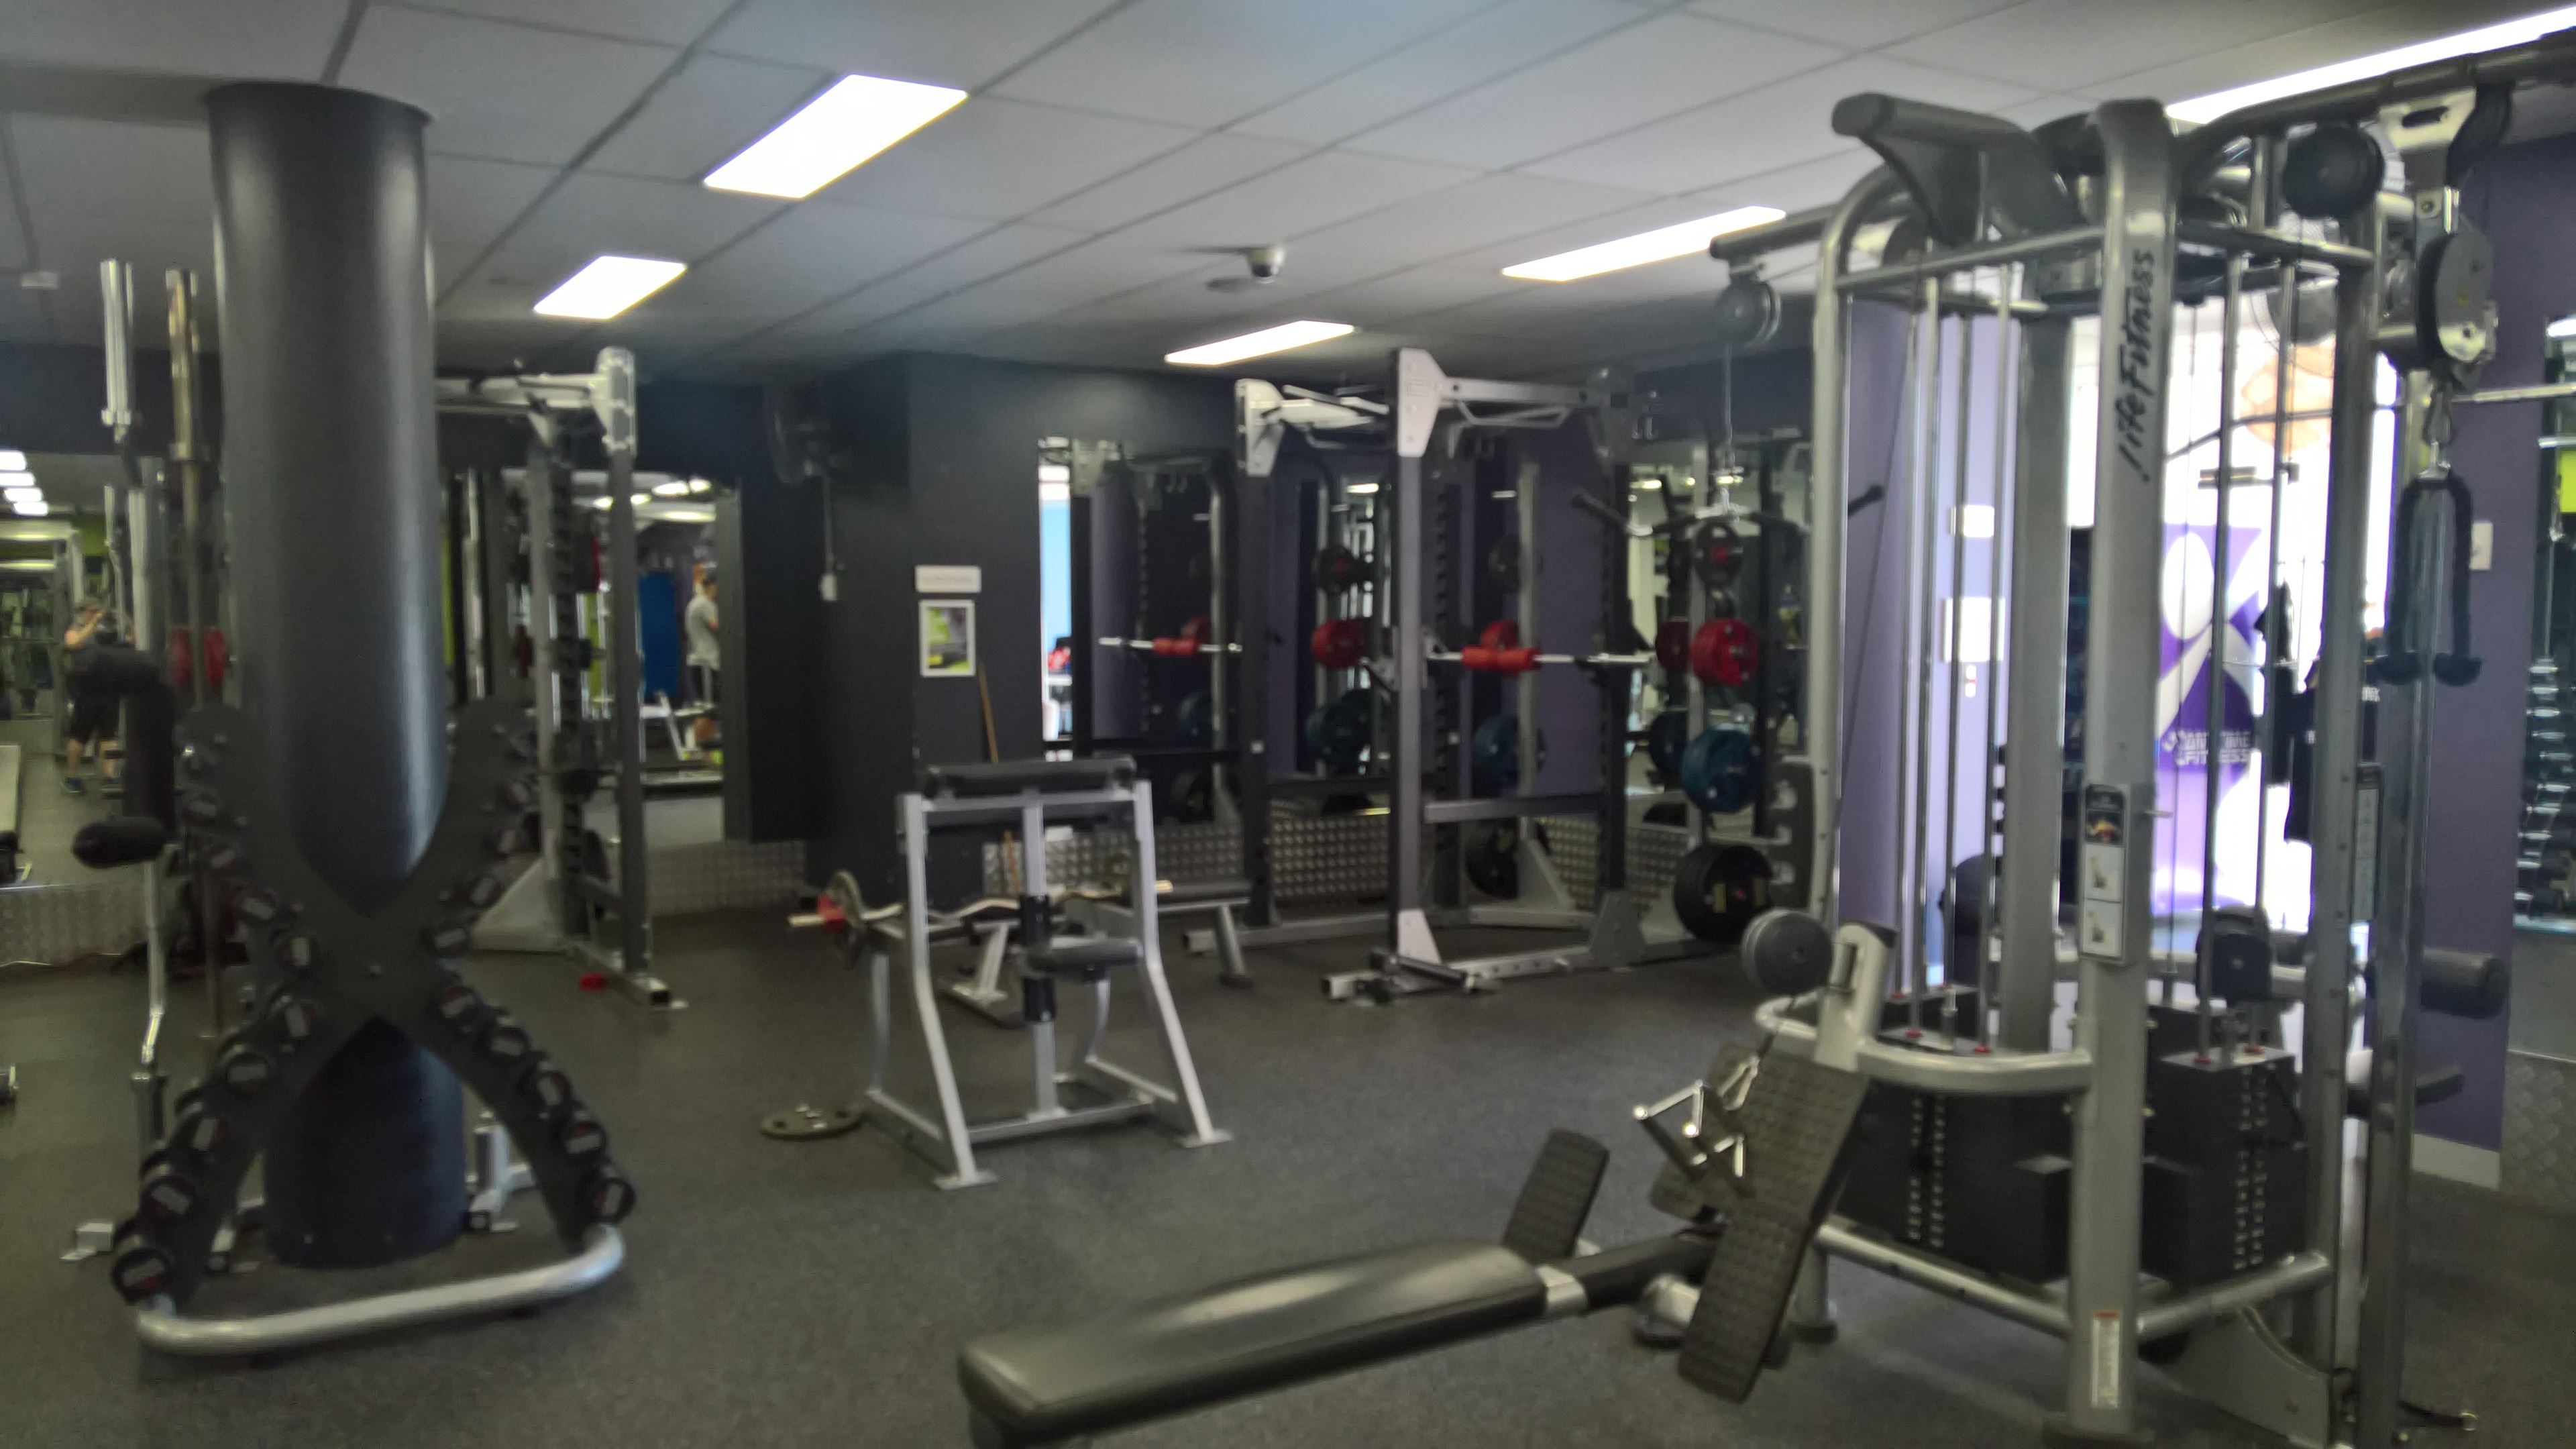 anytime fitness rates plymouth wi